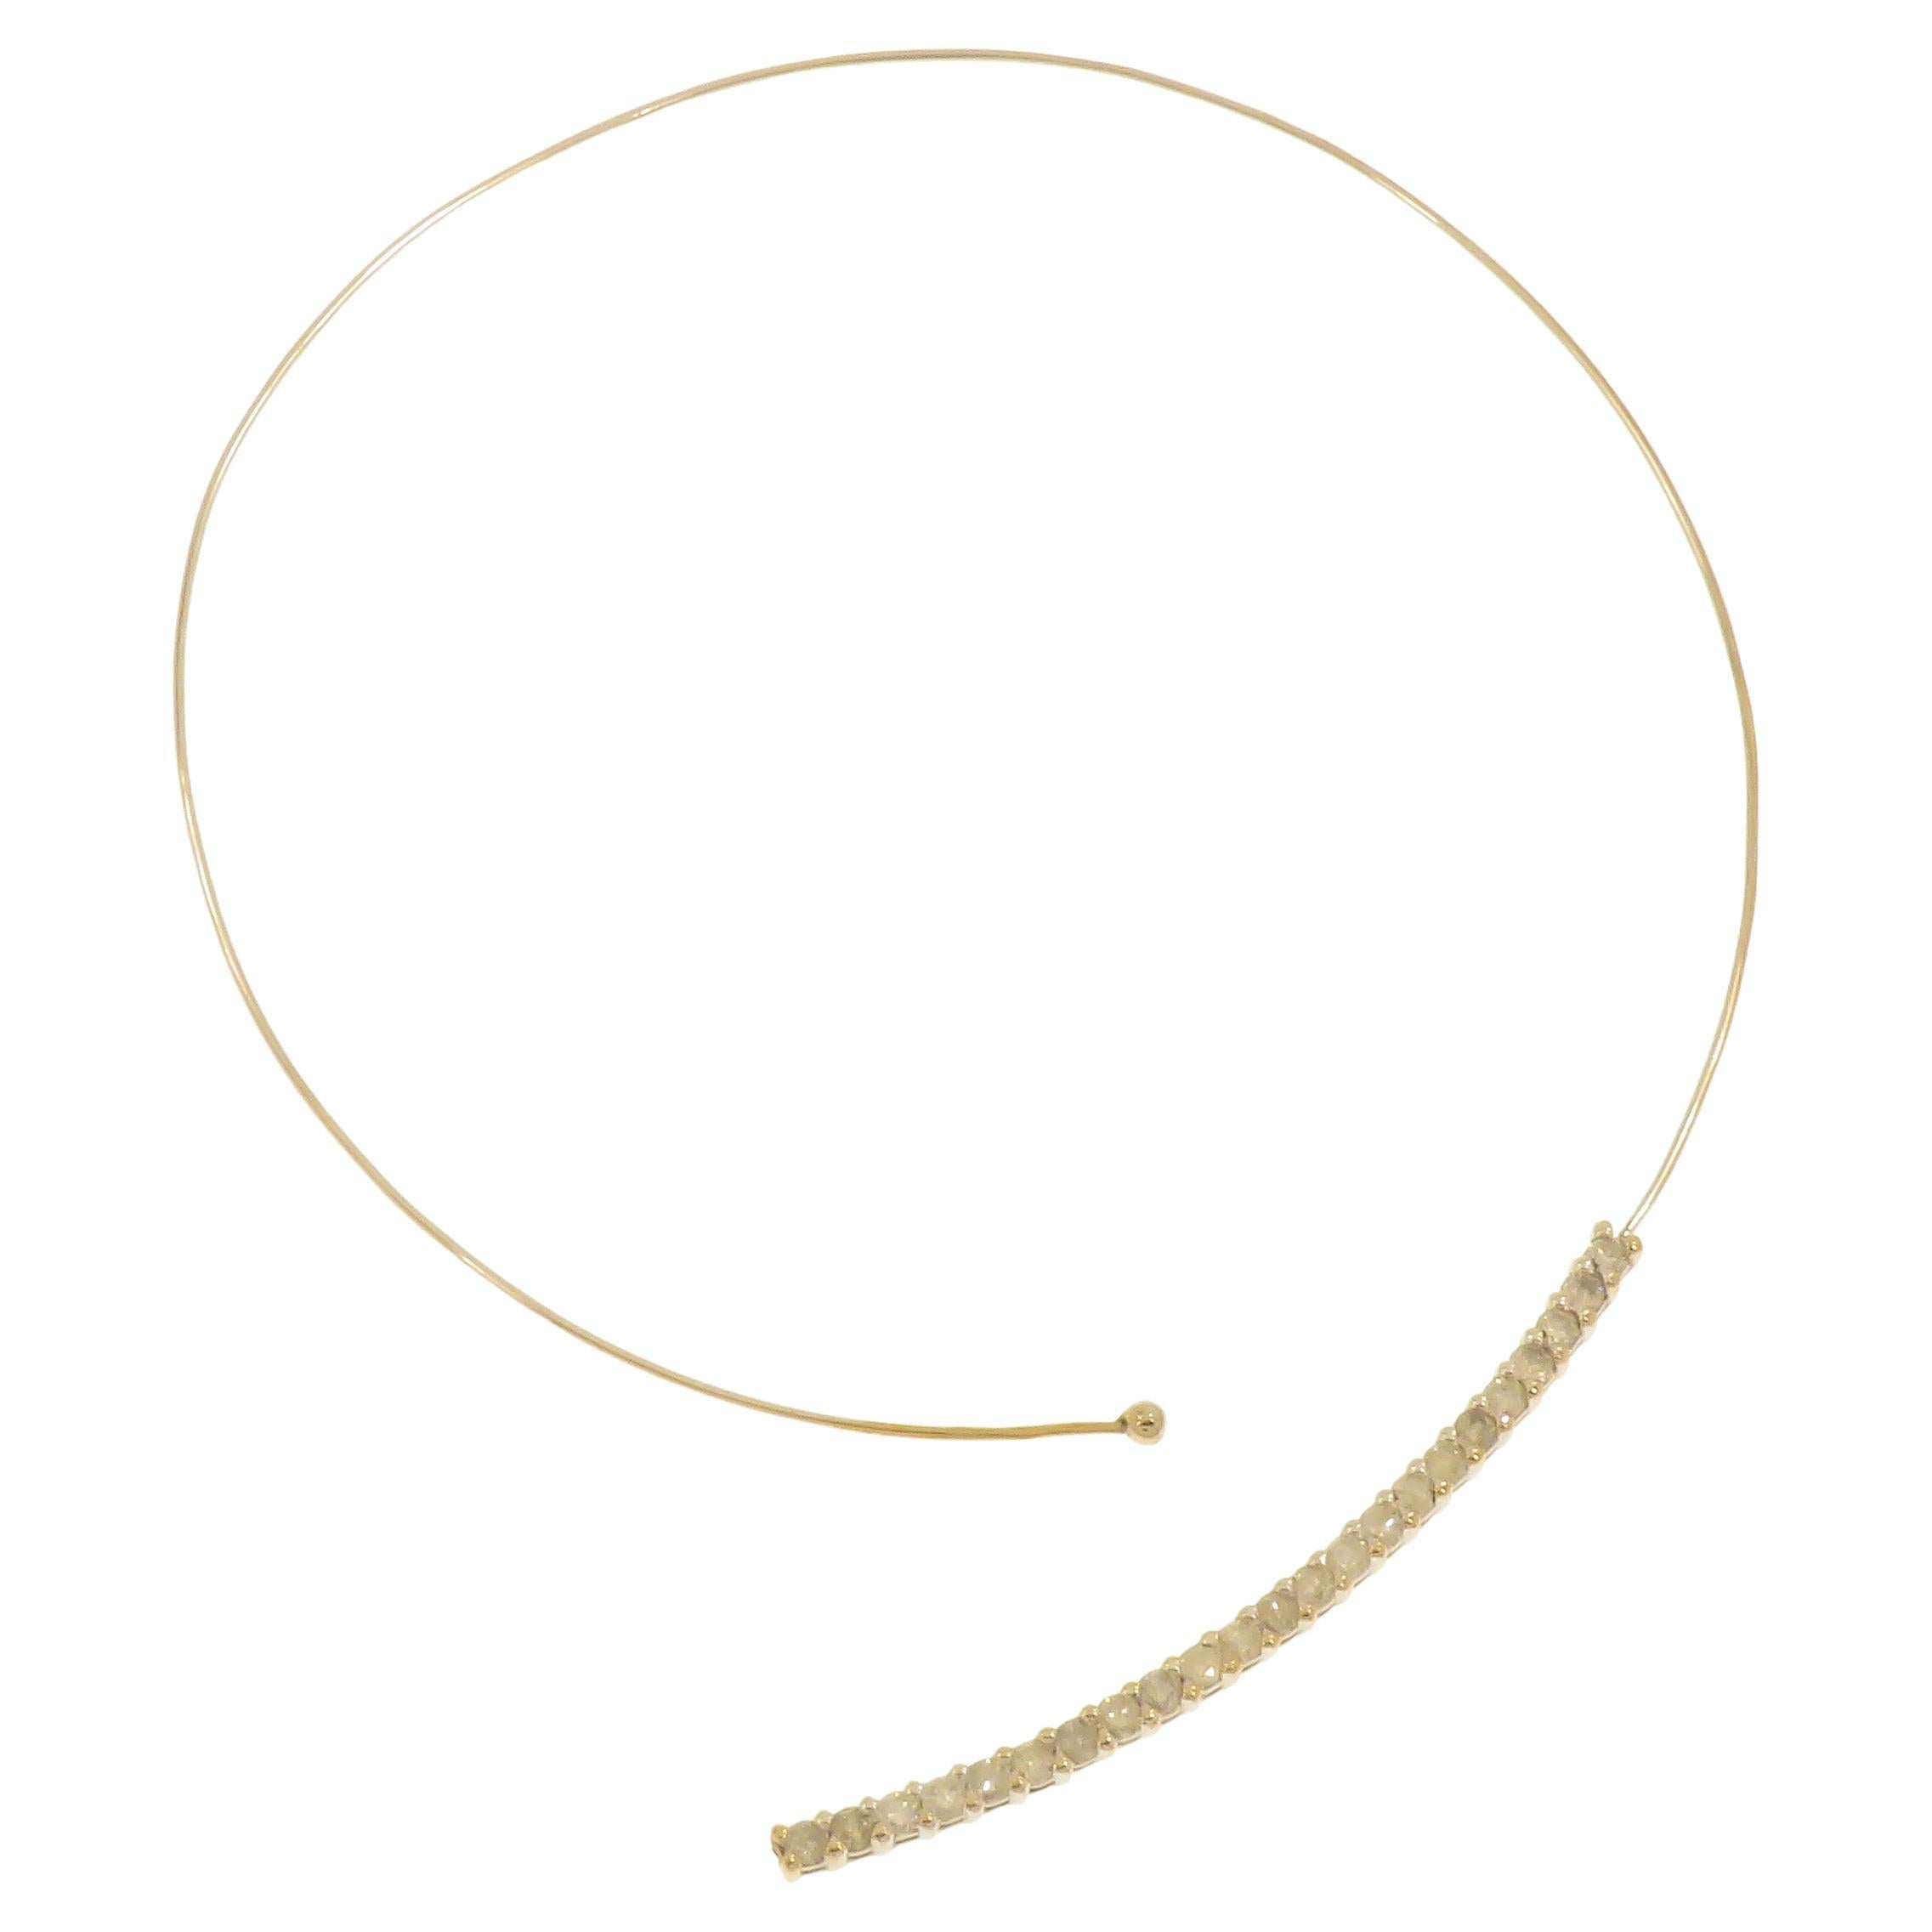 Diamonds 18 Karat Gold Choker Necklace Handcrafted in Italy by Botta Gioielli